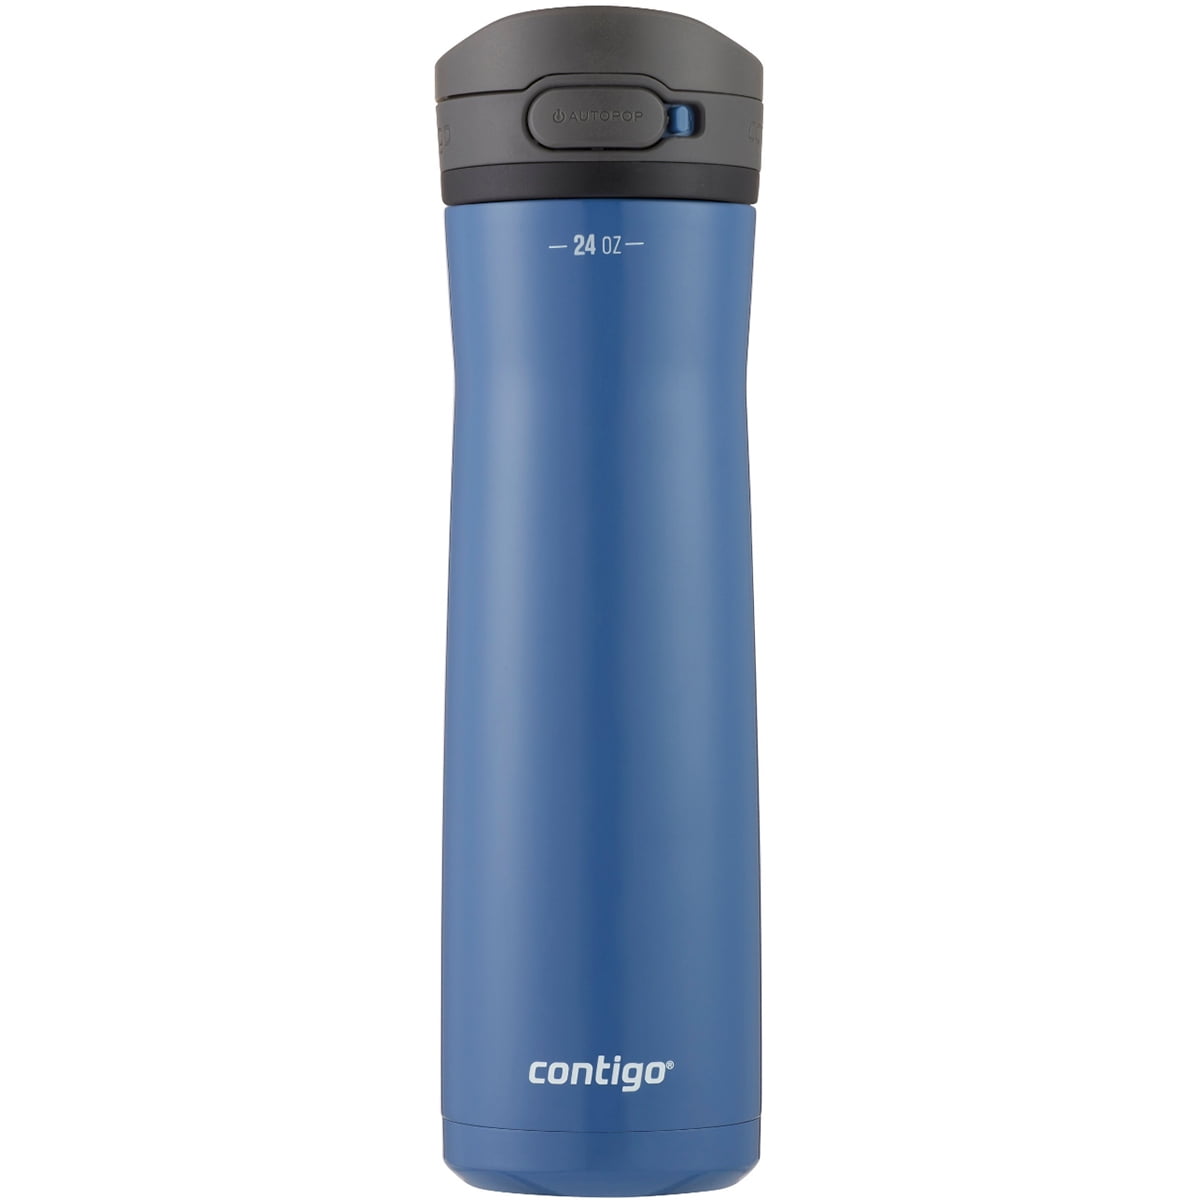 Contigo Clybourn Chill Freeflow Filtration Stainless Steel Water Bottle  with Spill-Proof Lid, 24oz Filtered Water Bottle with Carbon Fiber Filter